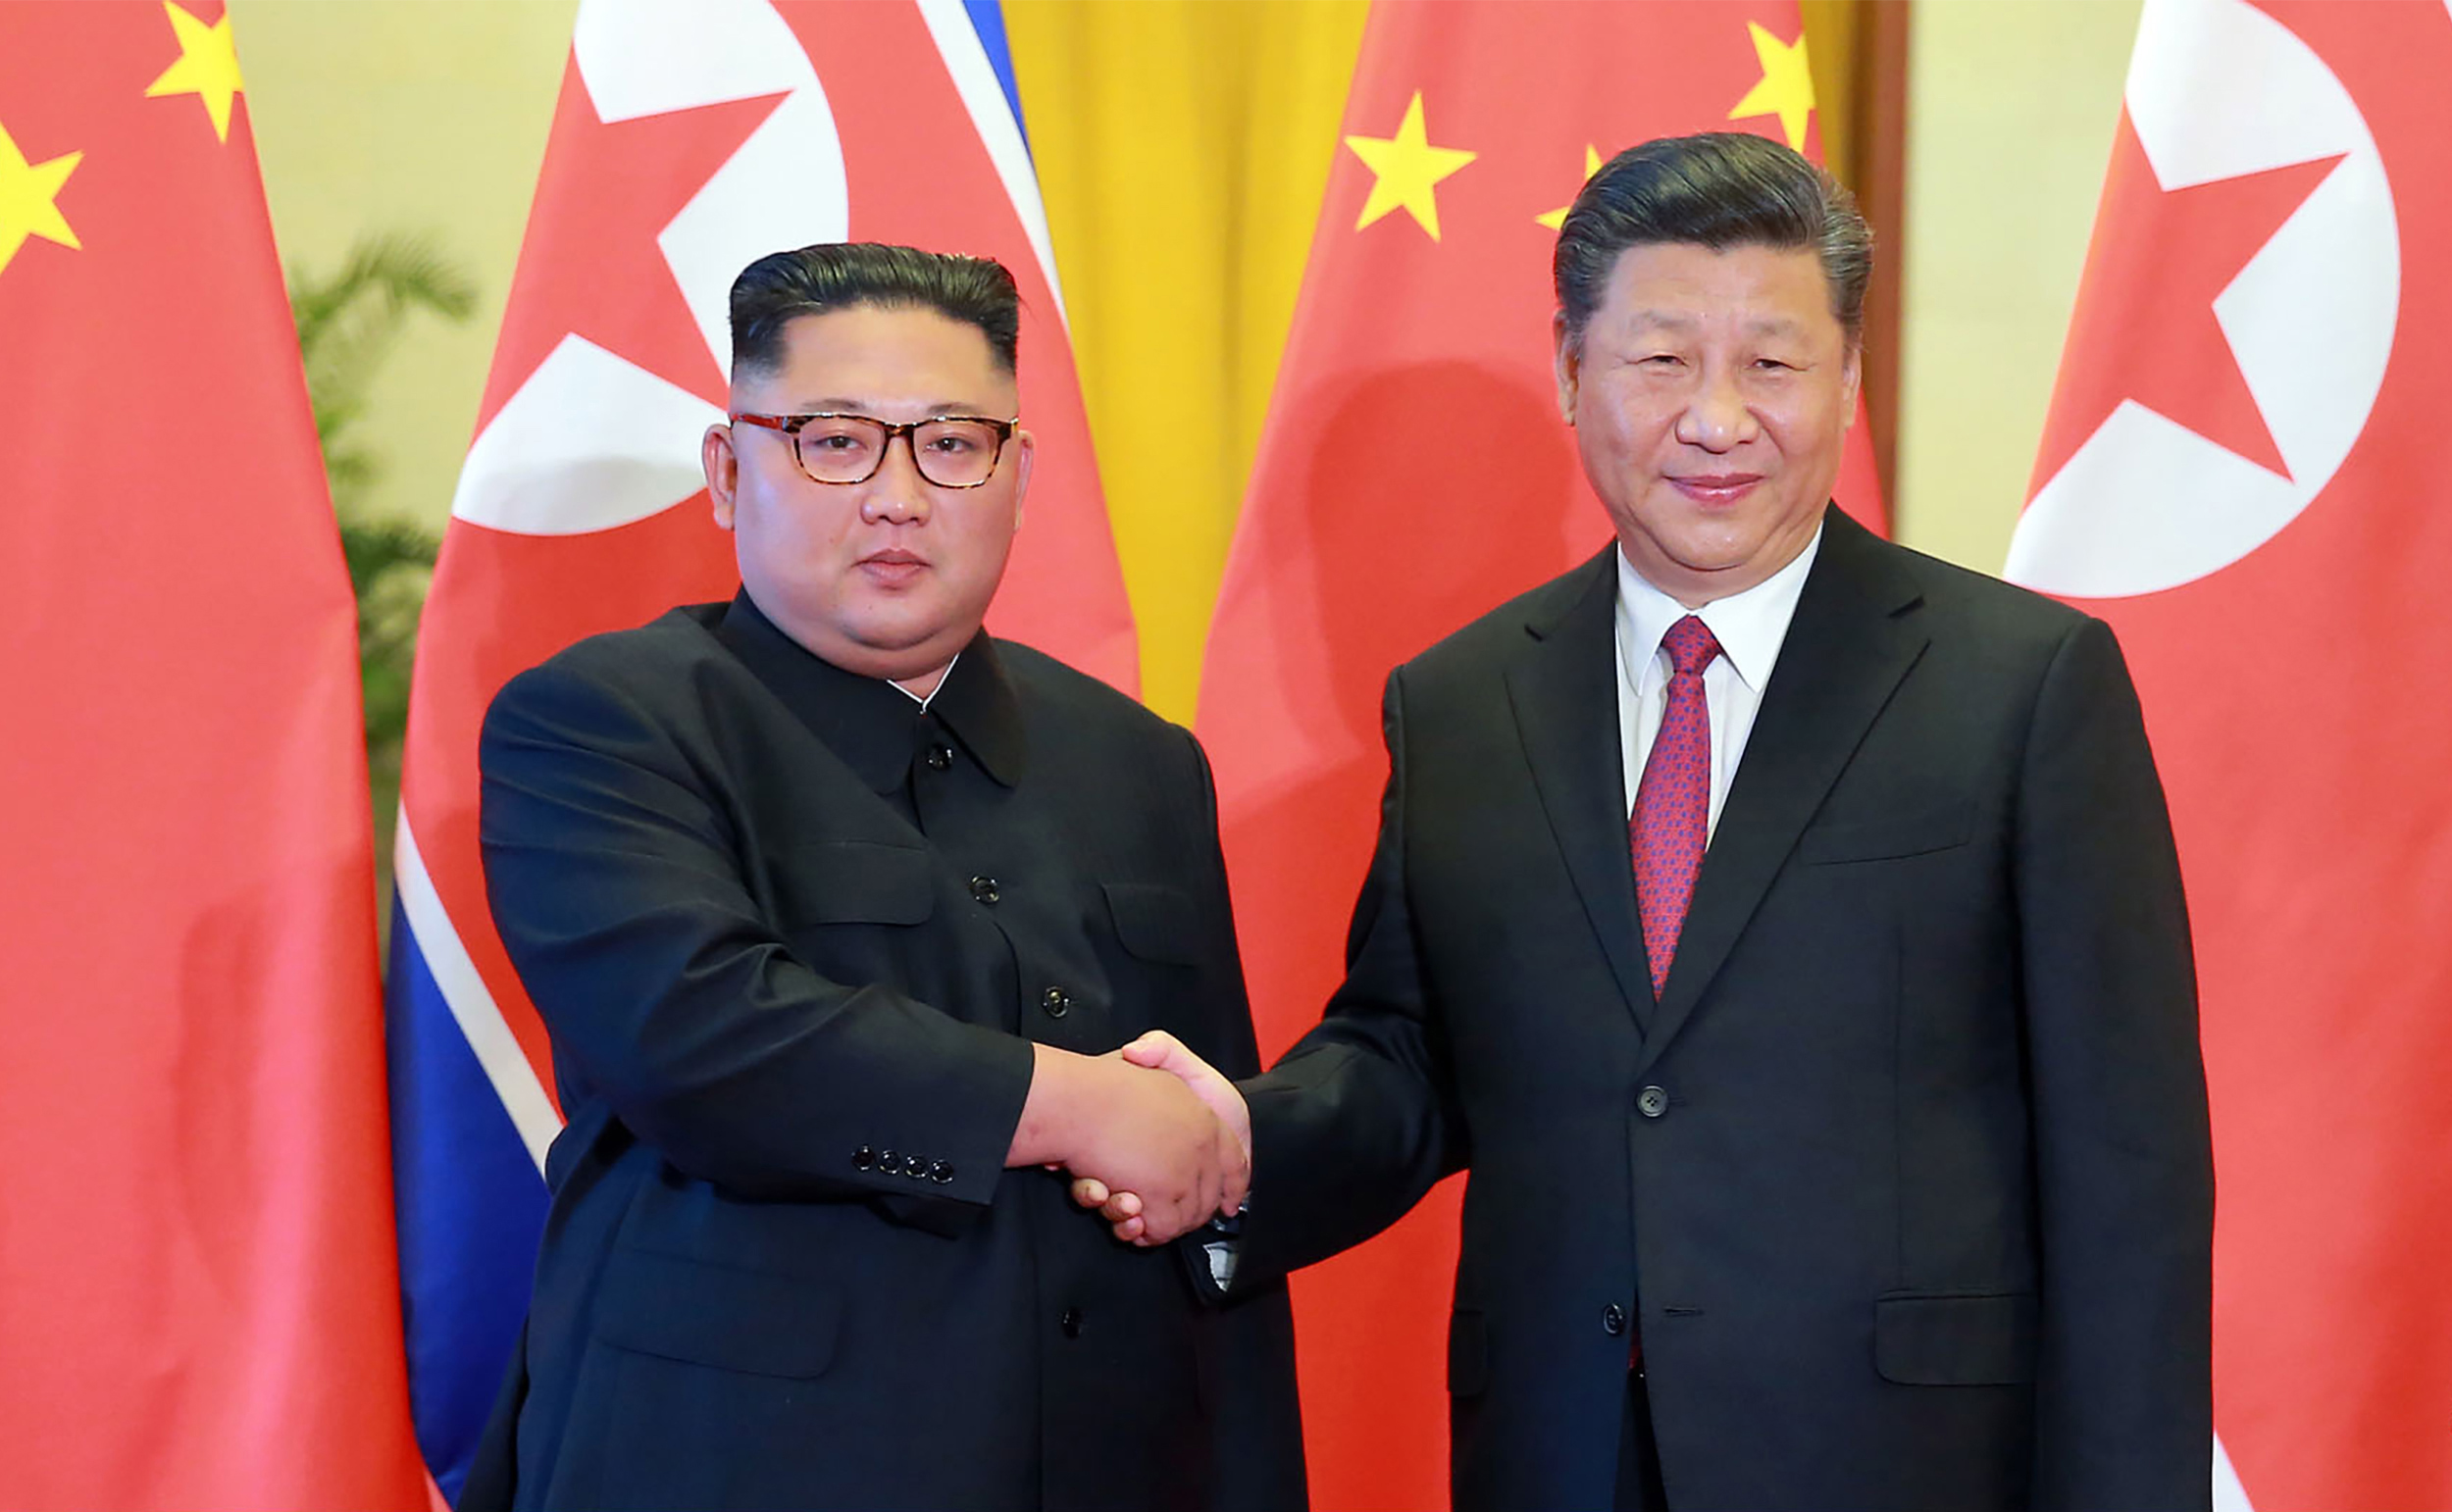 This picture taken on June 19, 2018 and released by North Korea's official Korean Central News Agency on June 20, 2018 shows North Korean leader Kim Jong Un, left, shaking hands with Chinese President Xi Jinping at the Great Hall of the People in Beijing.